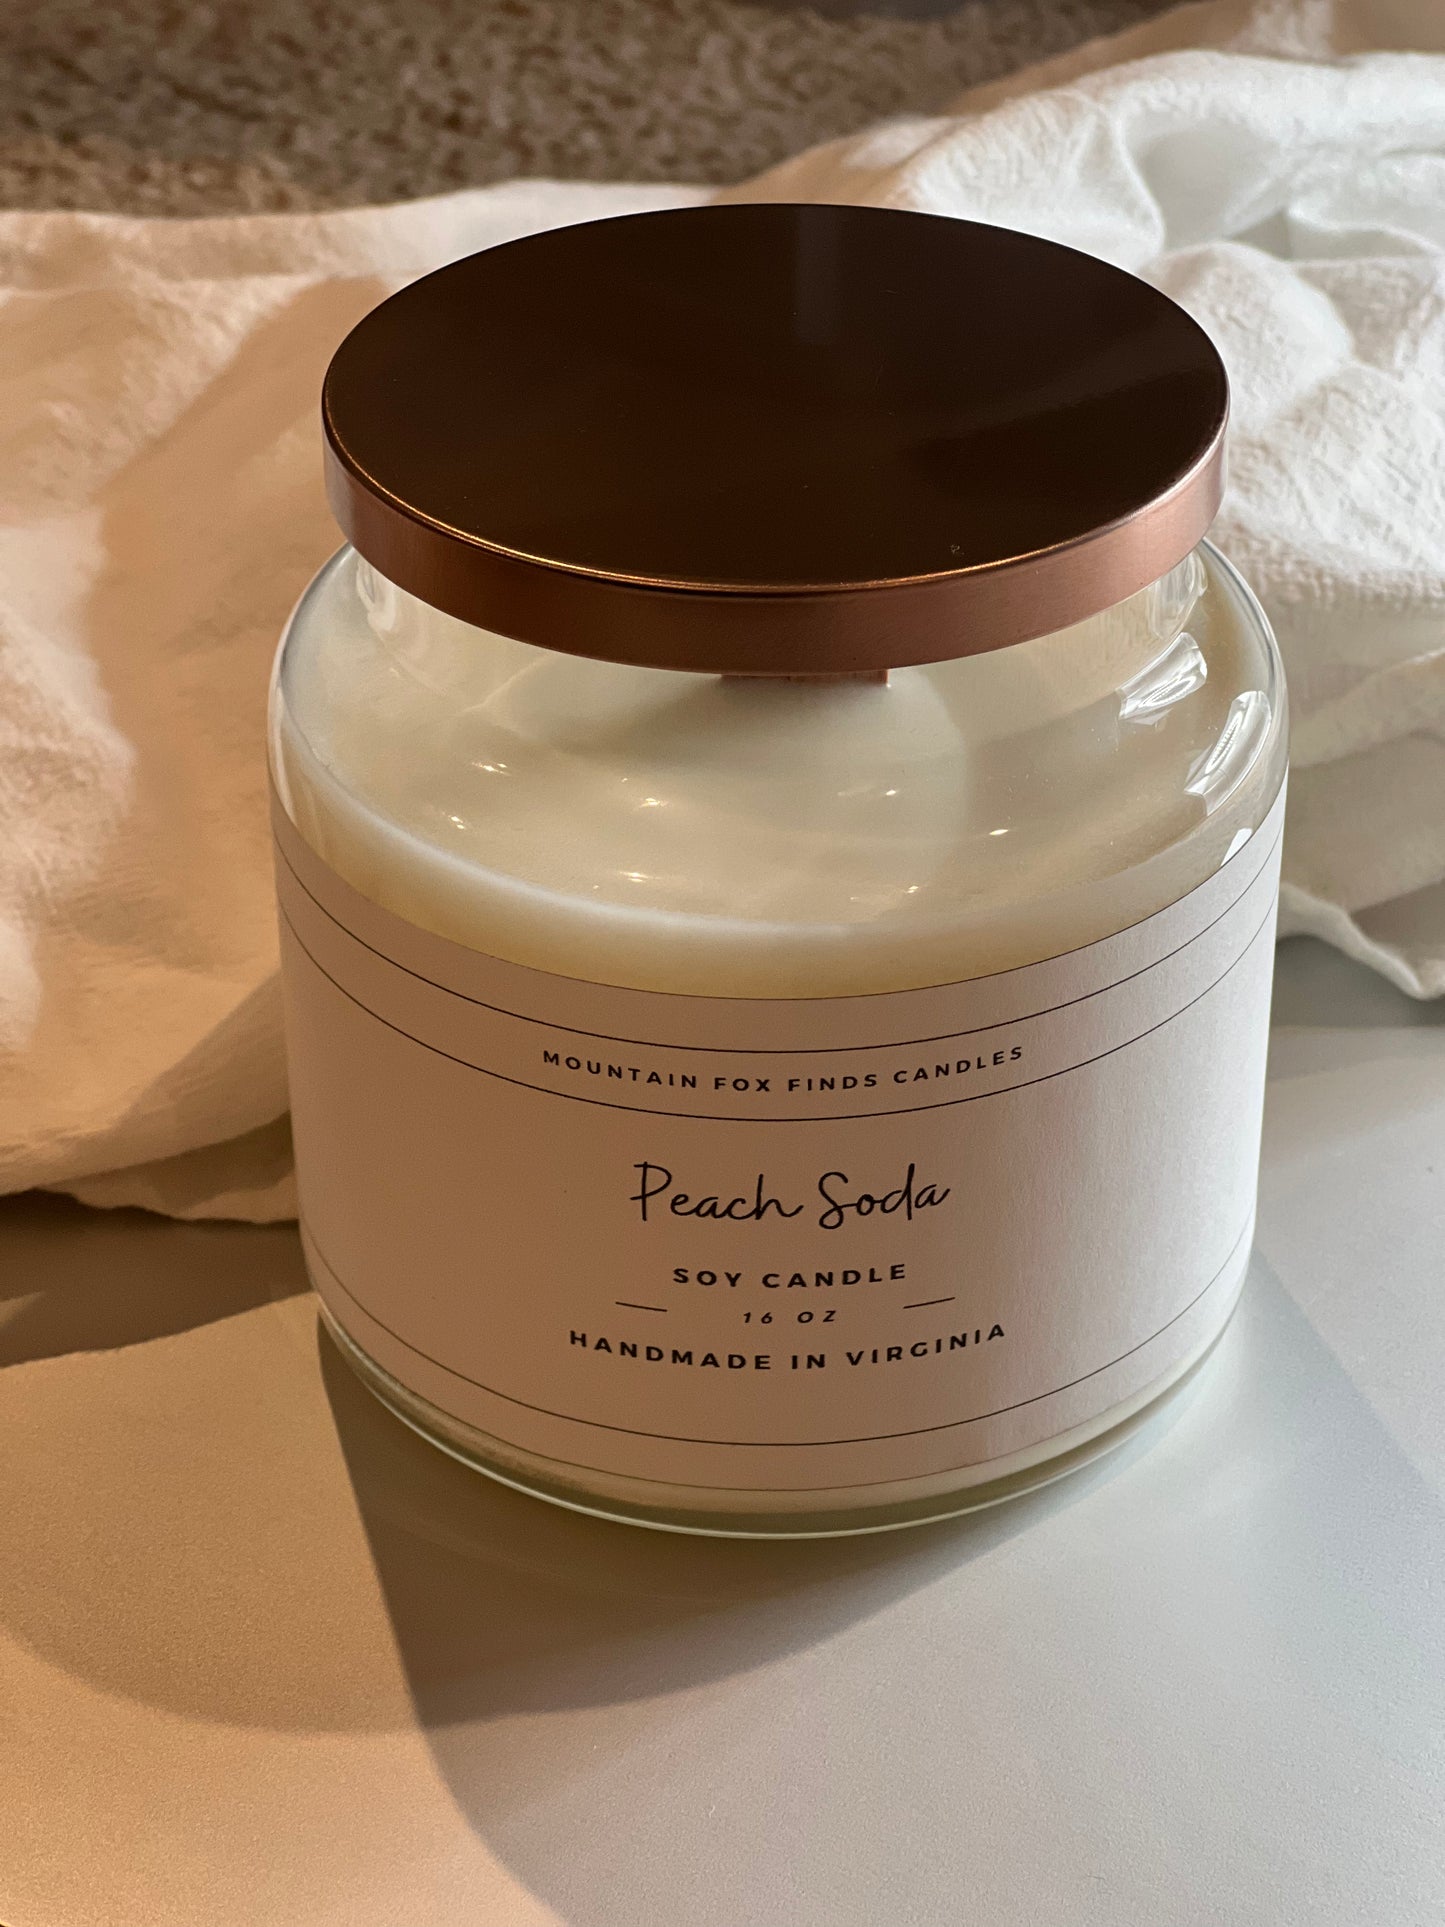 Peach Soda Apothecary Jar Soy Wax Candle Above Side